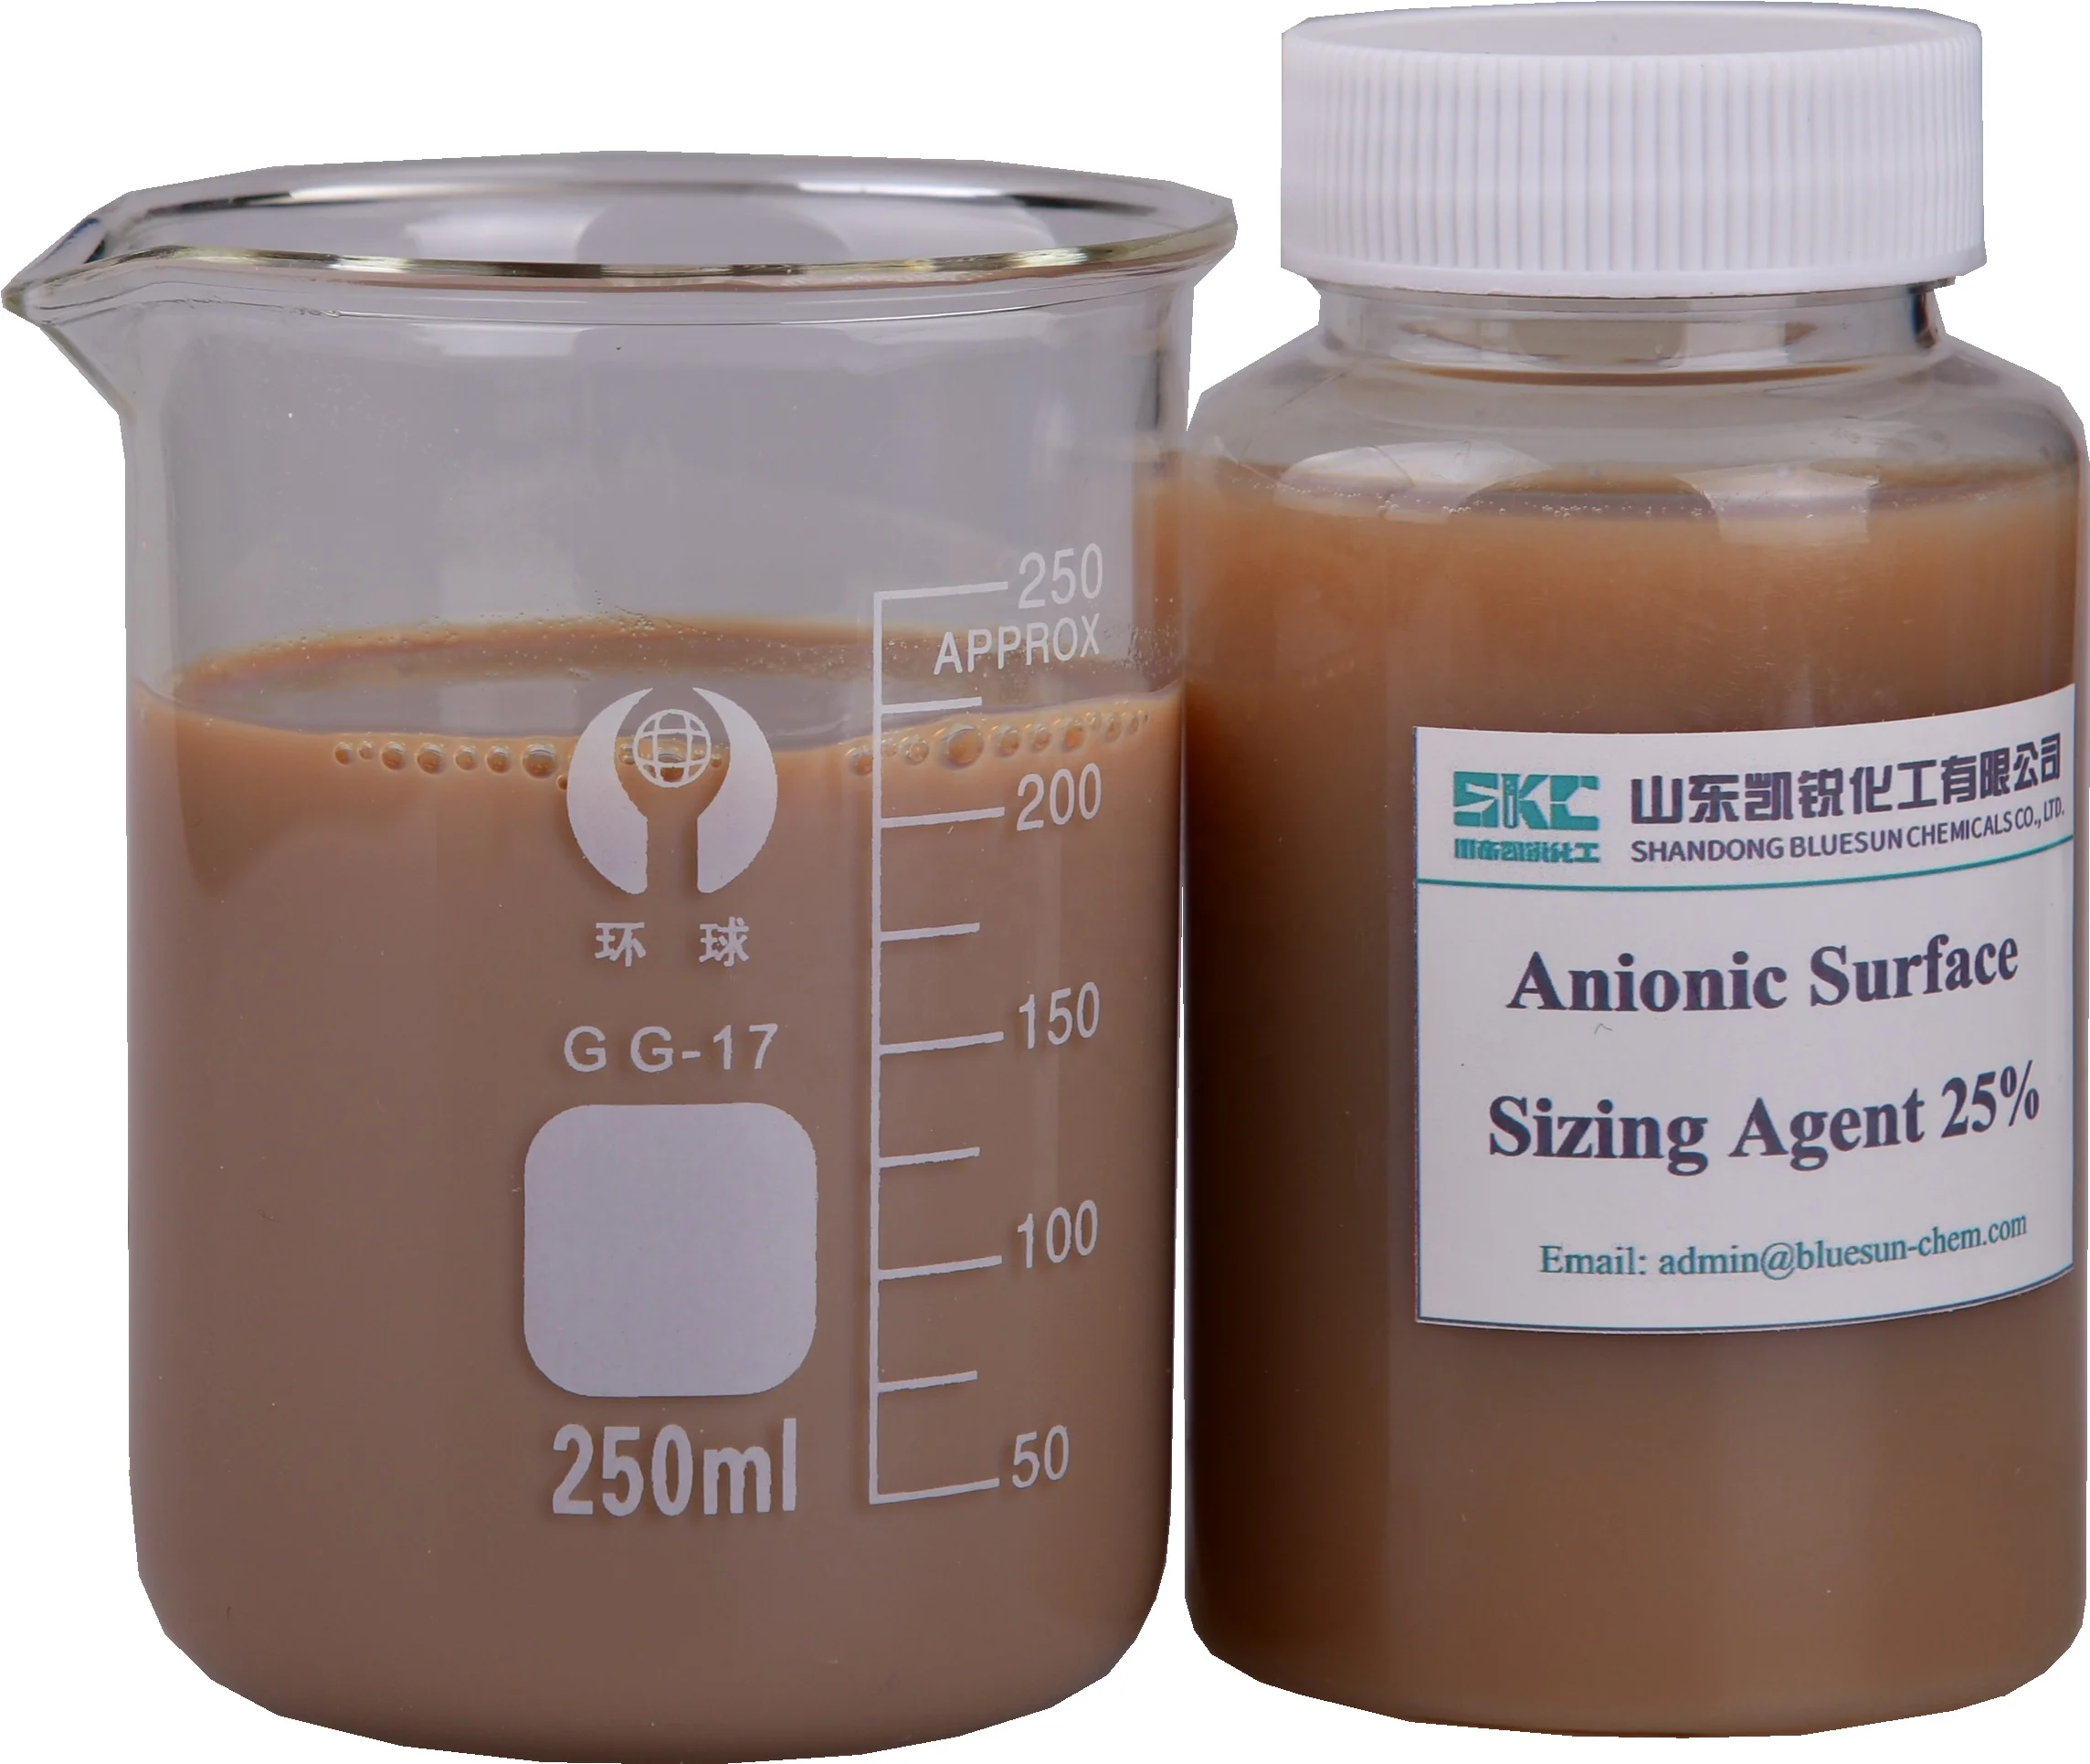 
BS235A Anionic Surface Sizing Agent SAE Based for Writing Culture Paper Water Proofing Chemicals 